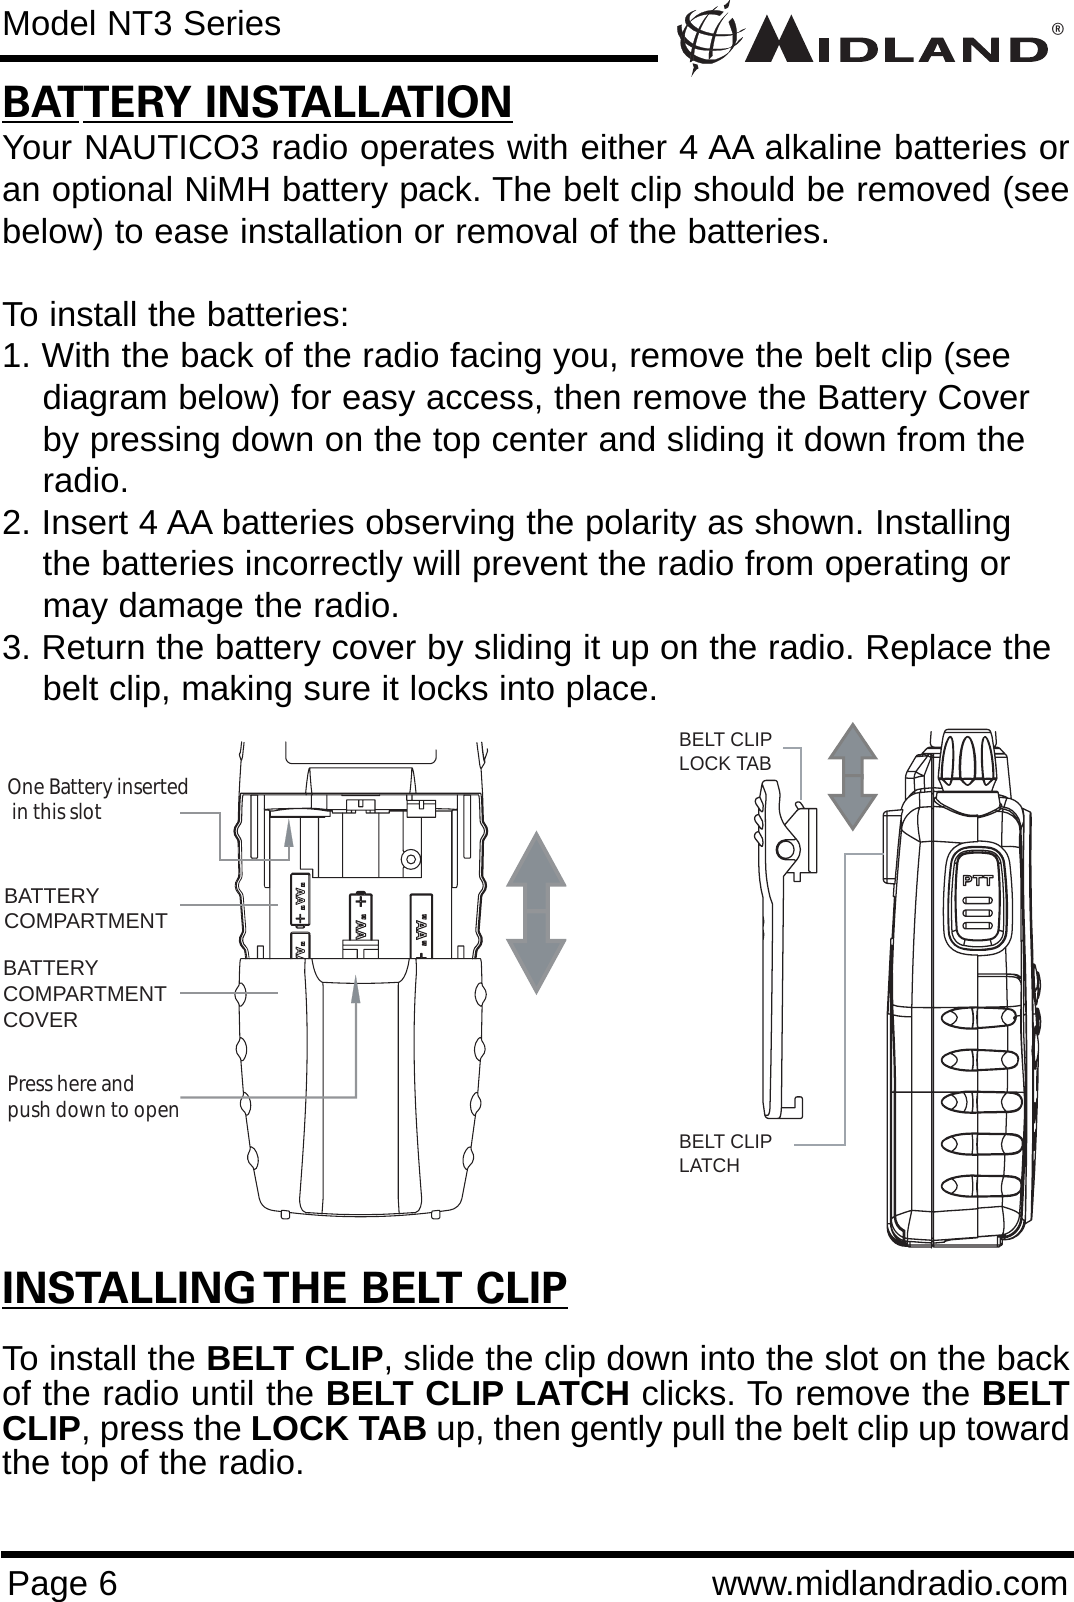 ®Page 6 www.midlandradio.comBATTERY INSTALLATIONYour NAUTICO3 radio operates with either 4 AA alkaline batteries oran optional NiMH battery pack. The belt clip should be removed (seebelow) to ease installation or removal of the batteries. To install the batteries:1. With the back of the radio facing you, remove the belt clip (see    diagram below) for easy access, then remove the Battery Coverby pressing down on the top center and sliding it down from the radio.2. Insert 4 AA batteries observing the polarity as shown. Installingthe batteries incorrectly will prevent the radio from operating ormay damage the radio.3. Return the battery cover by sliding it up on the radio. Replace the belt clip, making sure it locks into place.BATTERYCOMPARTMENTBATTERYCOMPARTMENTCOVEROne Battery inserted  in this slotPress here and push down to openModel NT3 SeriesINSTALLING THE BELT CLIPTo install the BELT CLIP, slide the clip down into the slot on the backof the radio until the BELT CLIP LATCH clicks. To remove the BELTCLIP, press the LOCK TAB up, then gently pull the belt clip up towardthe top of the radio.BELT CLIPLOCK TABBELT CLIP LATCH